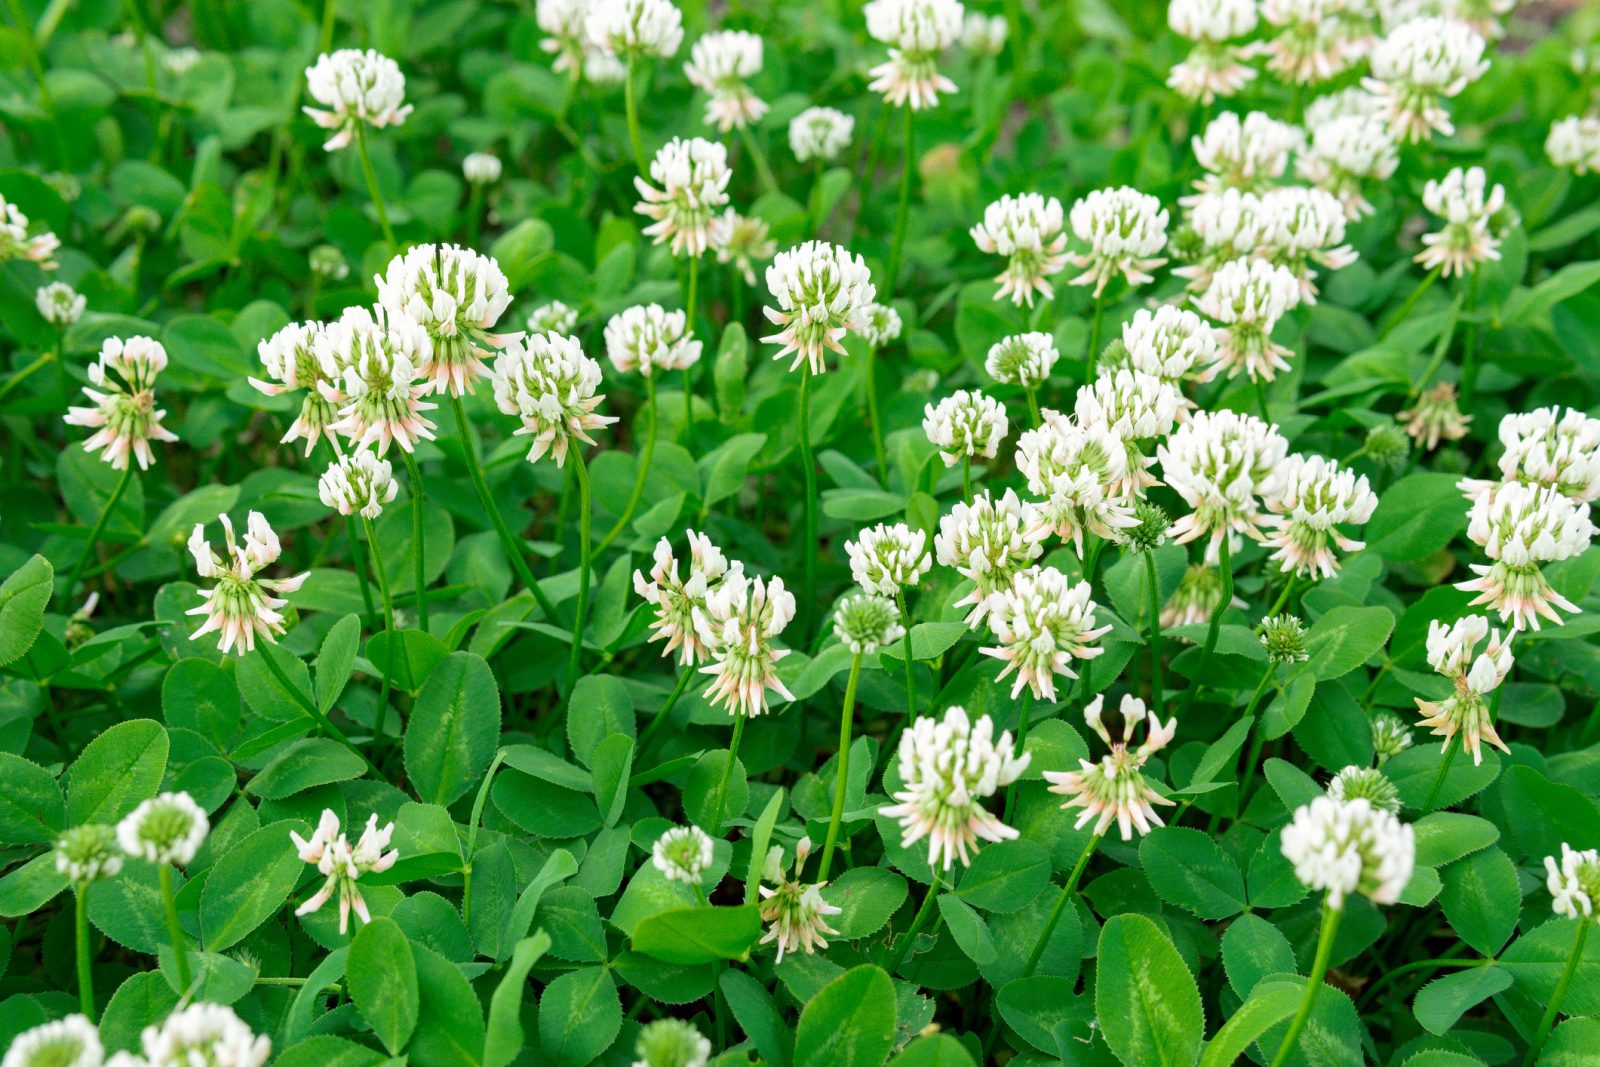 Stems with white petals forming a bulb-like formation on top stick up among a sea of green clover plants.